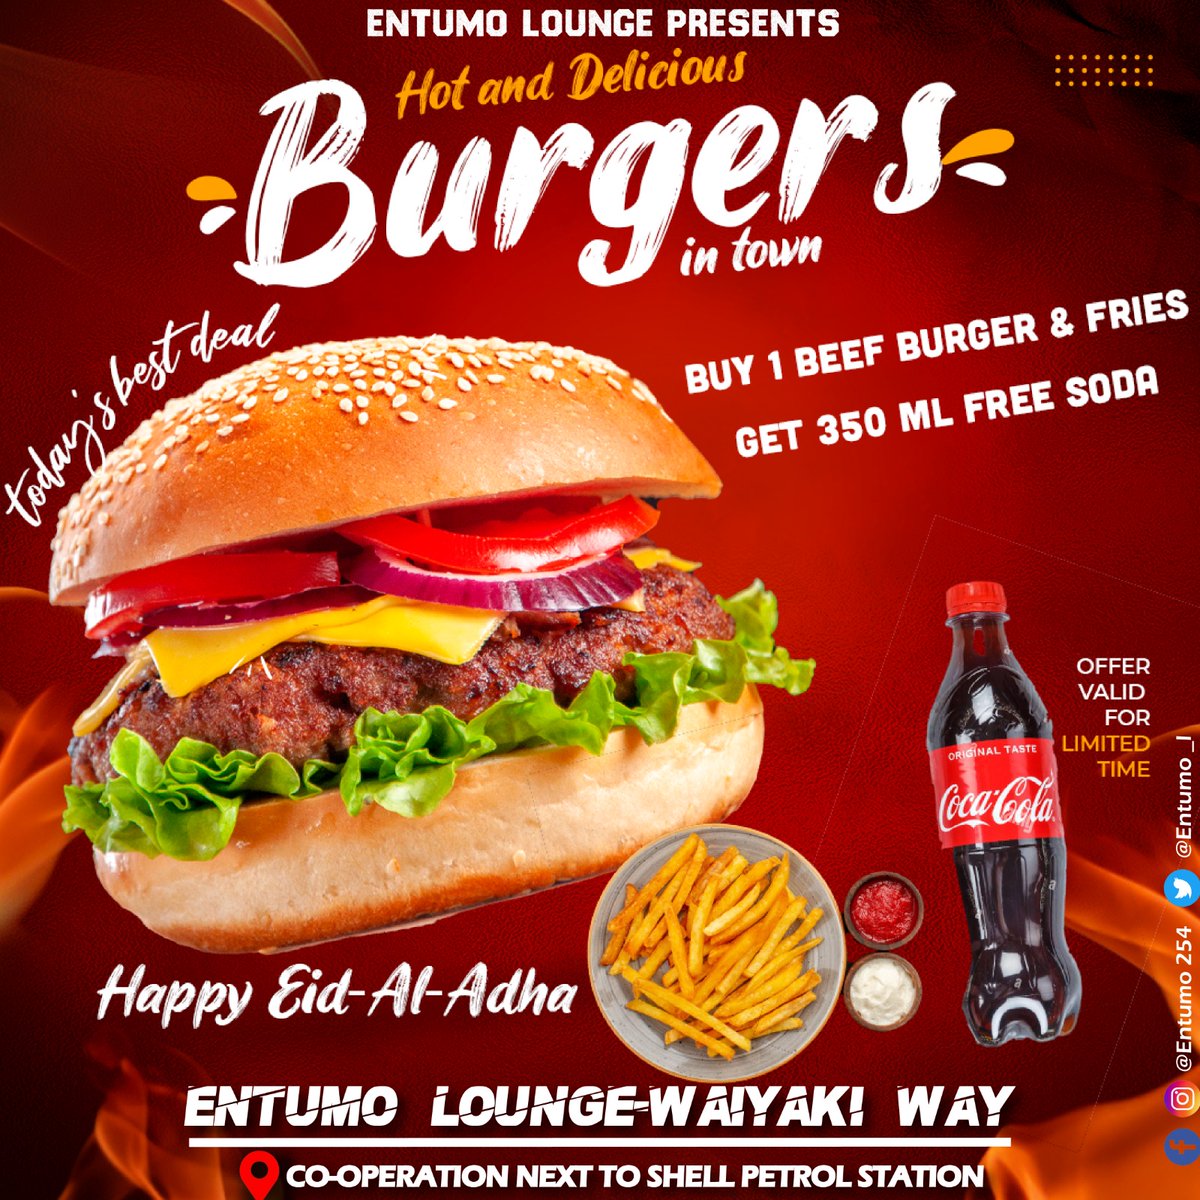 😋It is burger-licious time 💥This is the real deal 👉buy 1 one of our burgers with fries get a 350ml soda free 💥Real food made real tasty For orders, deliveries& reservations kindly call us on 0735334435 or 0711555258 Entumo Lounge ⏩Another Place........Another World⏪